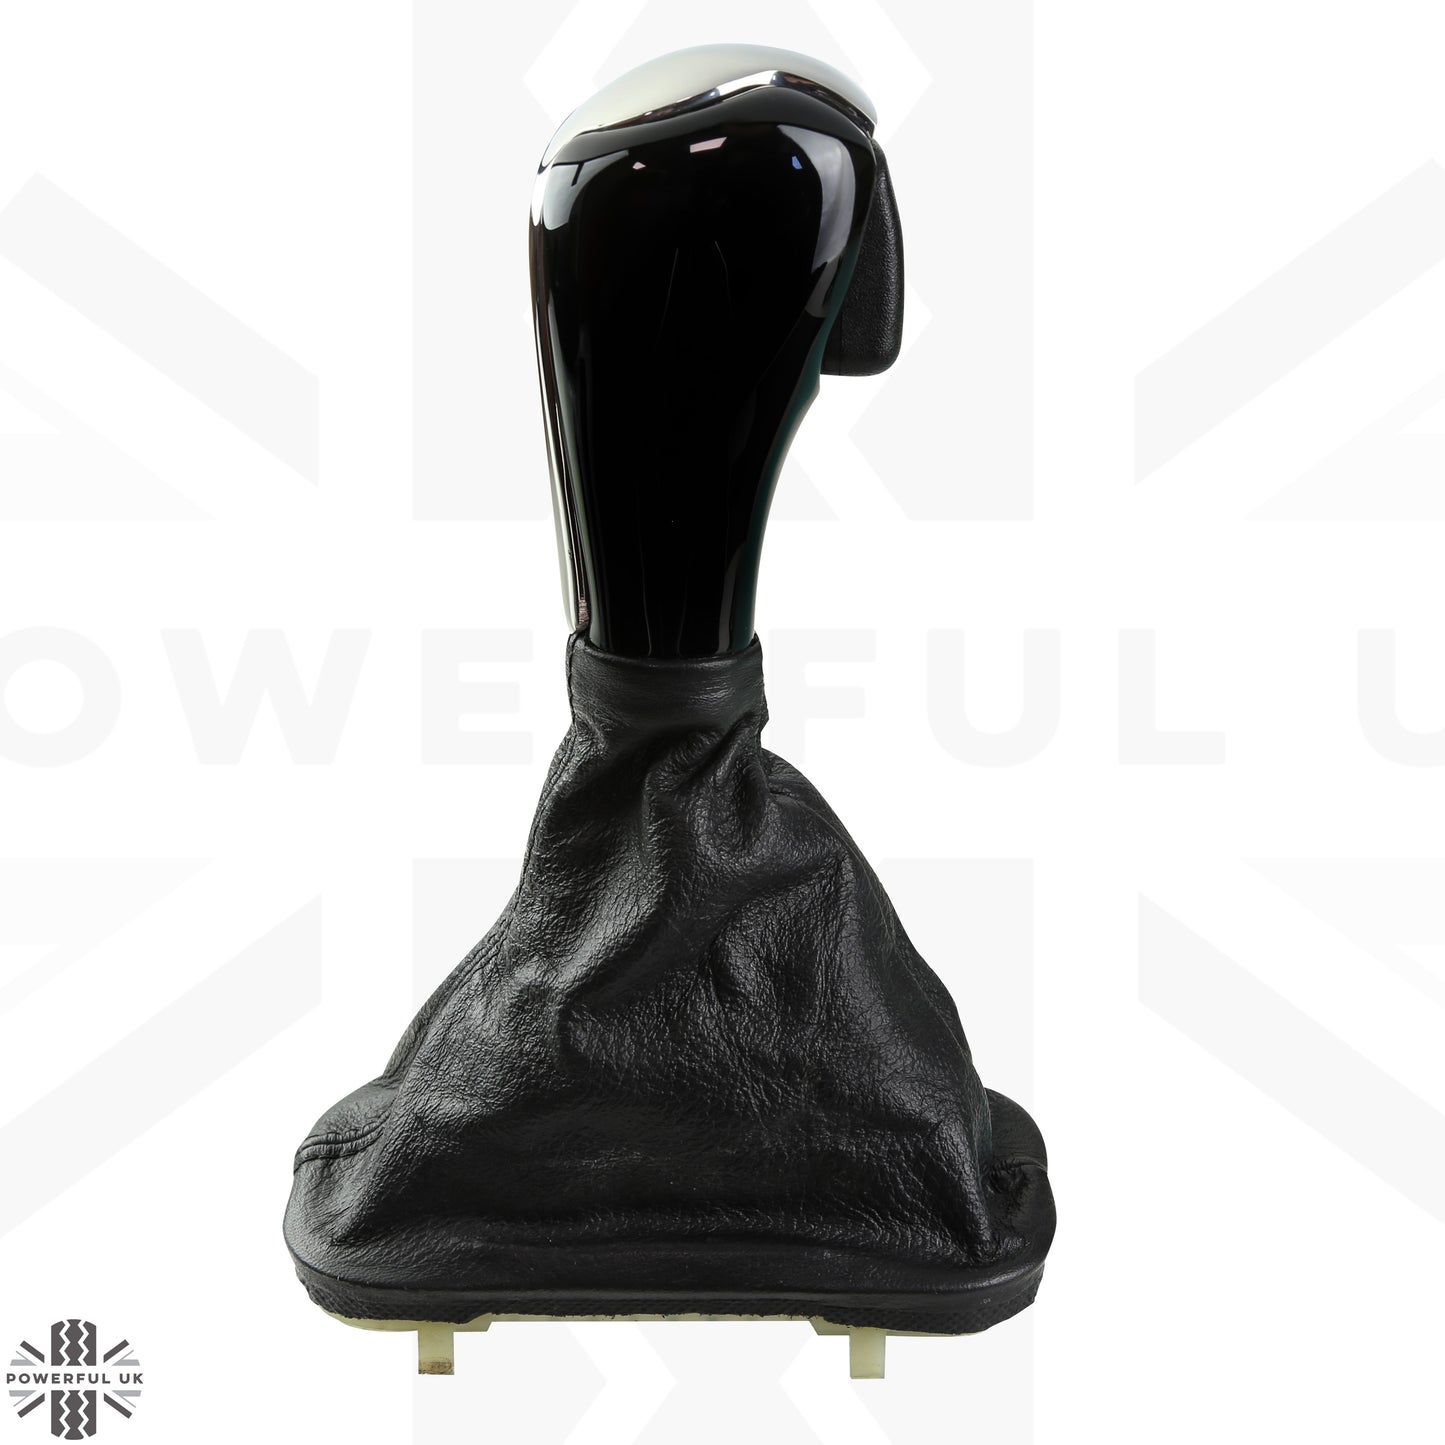 Gear Knob - Black Piano + Polished Metal Insert for Range Rover L322